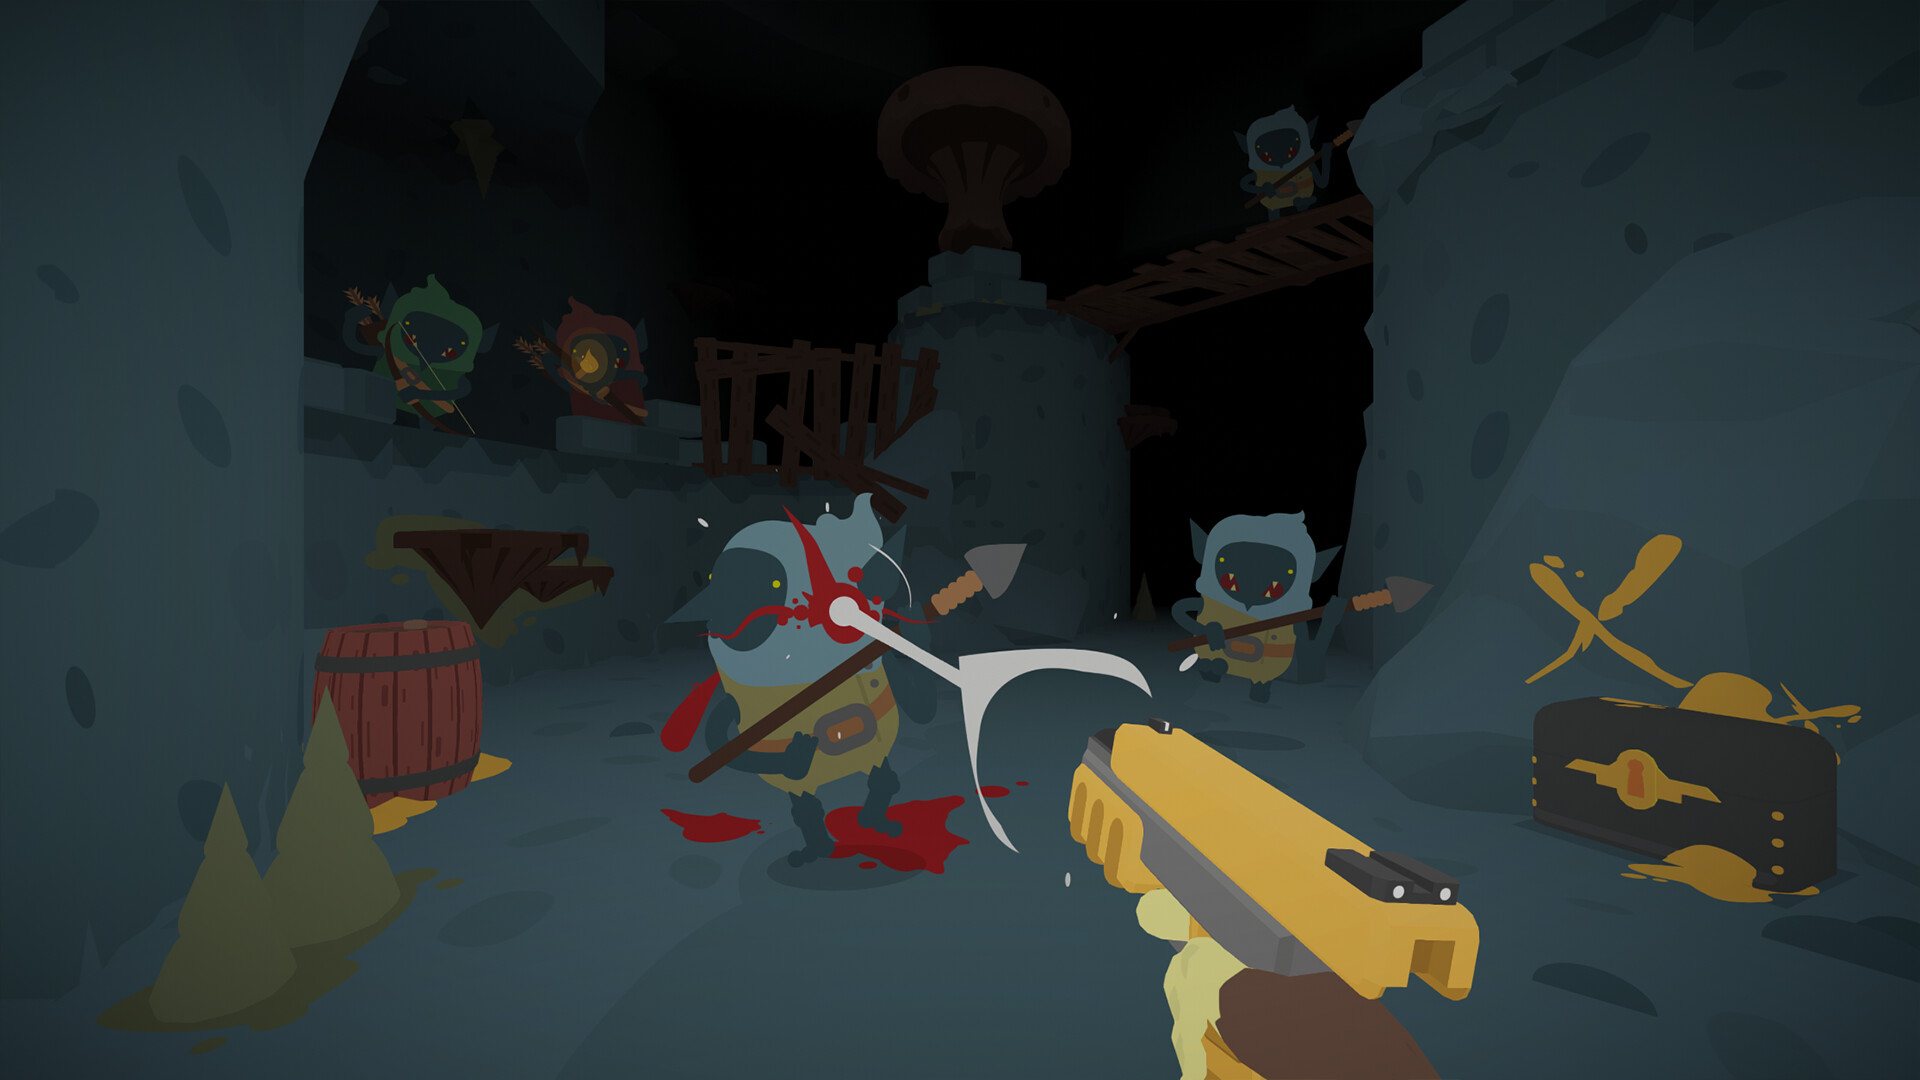  Blast goblins in a cave in the demo for stylish, roguelike shooter Sulfur 